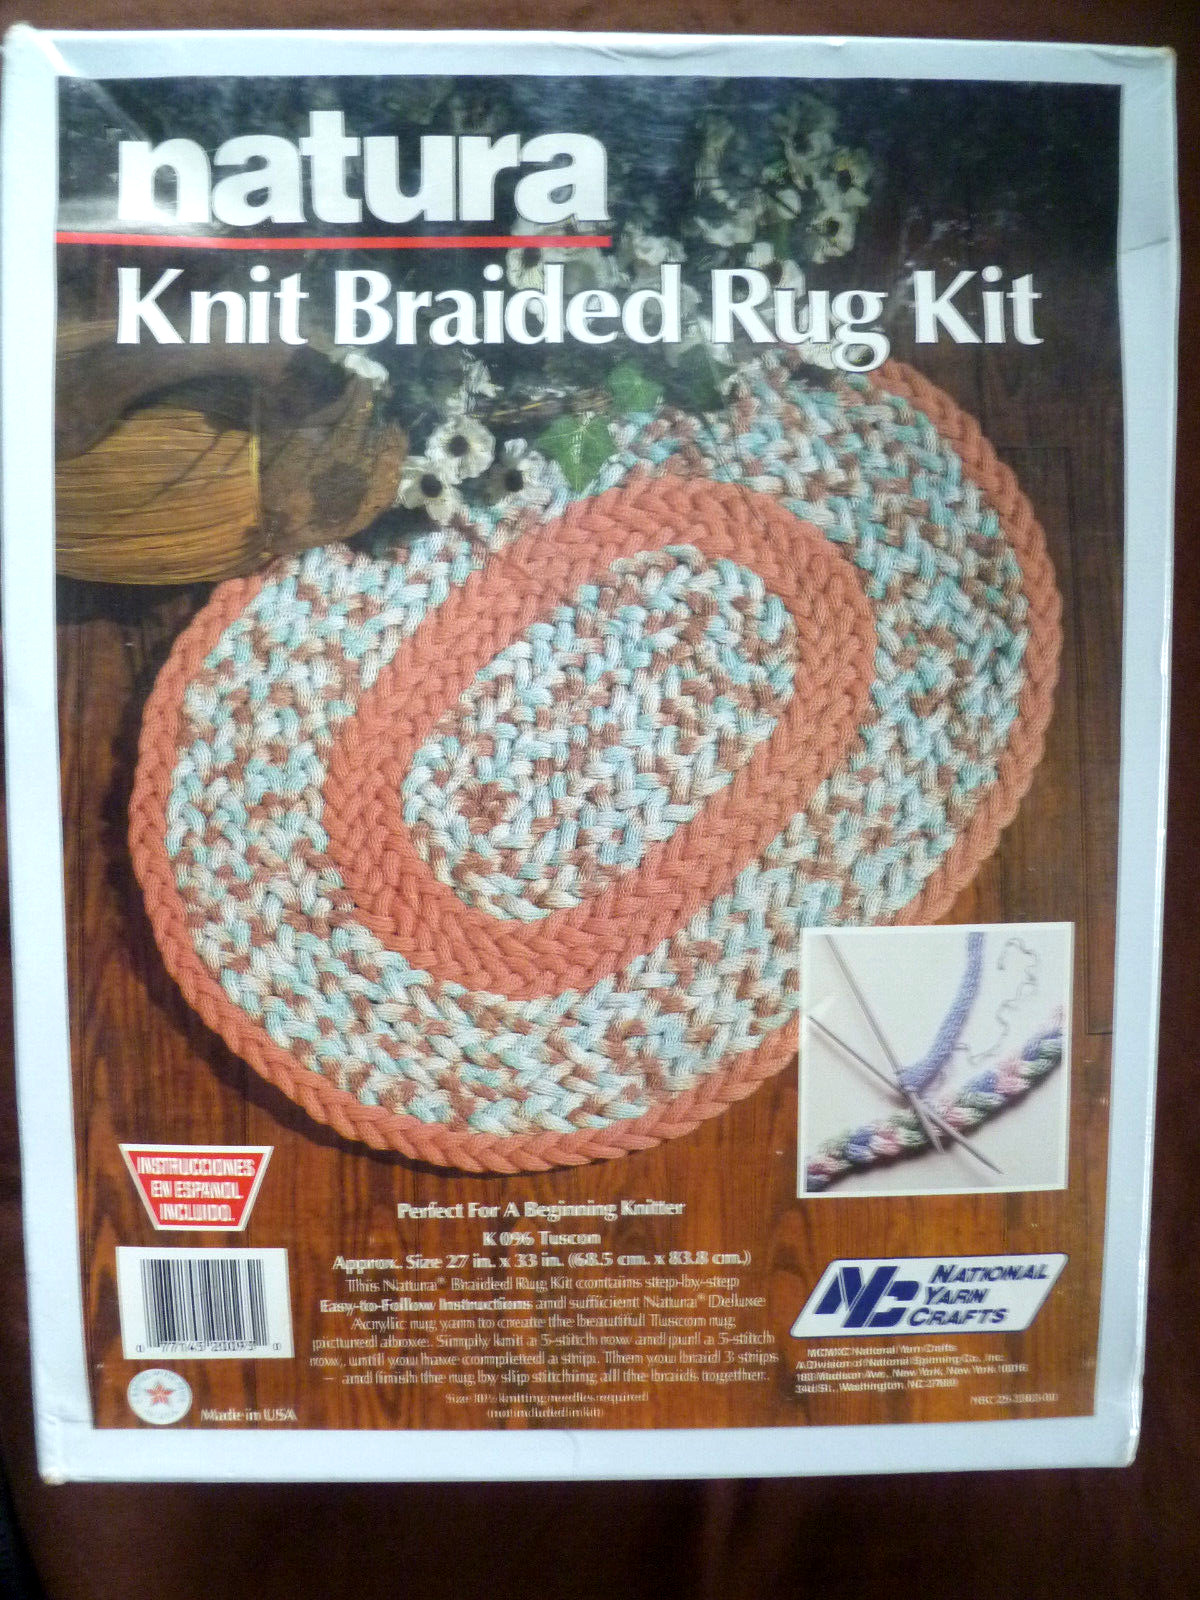 New - Natura Knit Braided Rug Kit ©1990, #k096 Tuscon, 27" X 33", Made In Usa